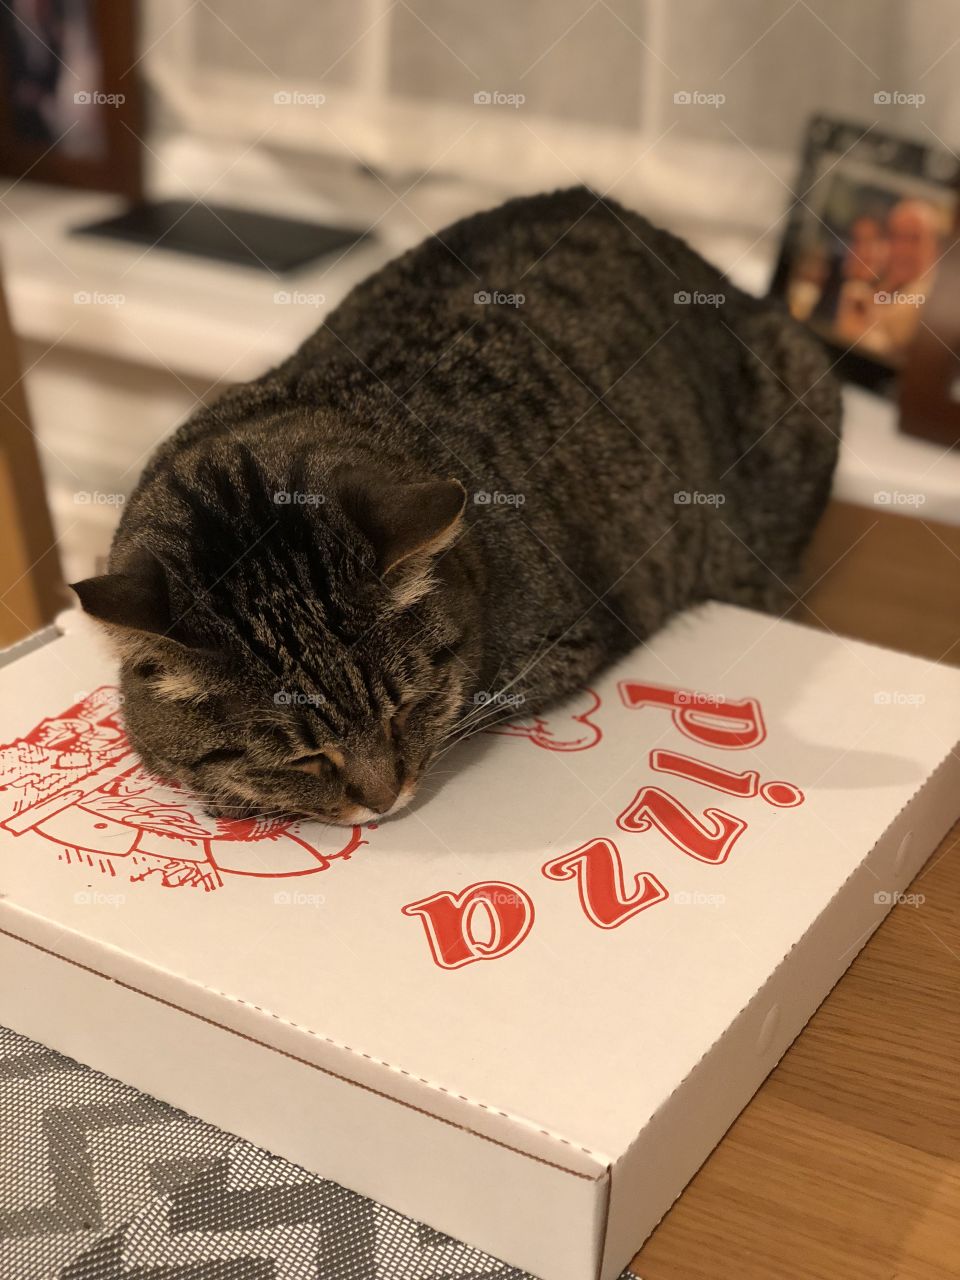 My cat loves pizza. And sleeping